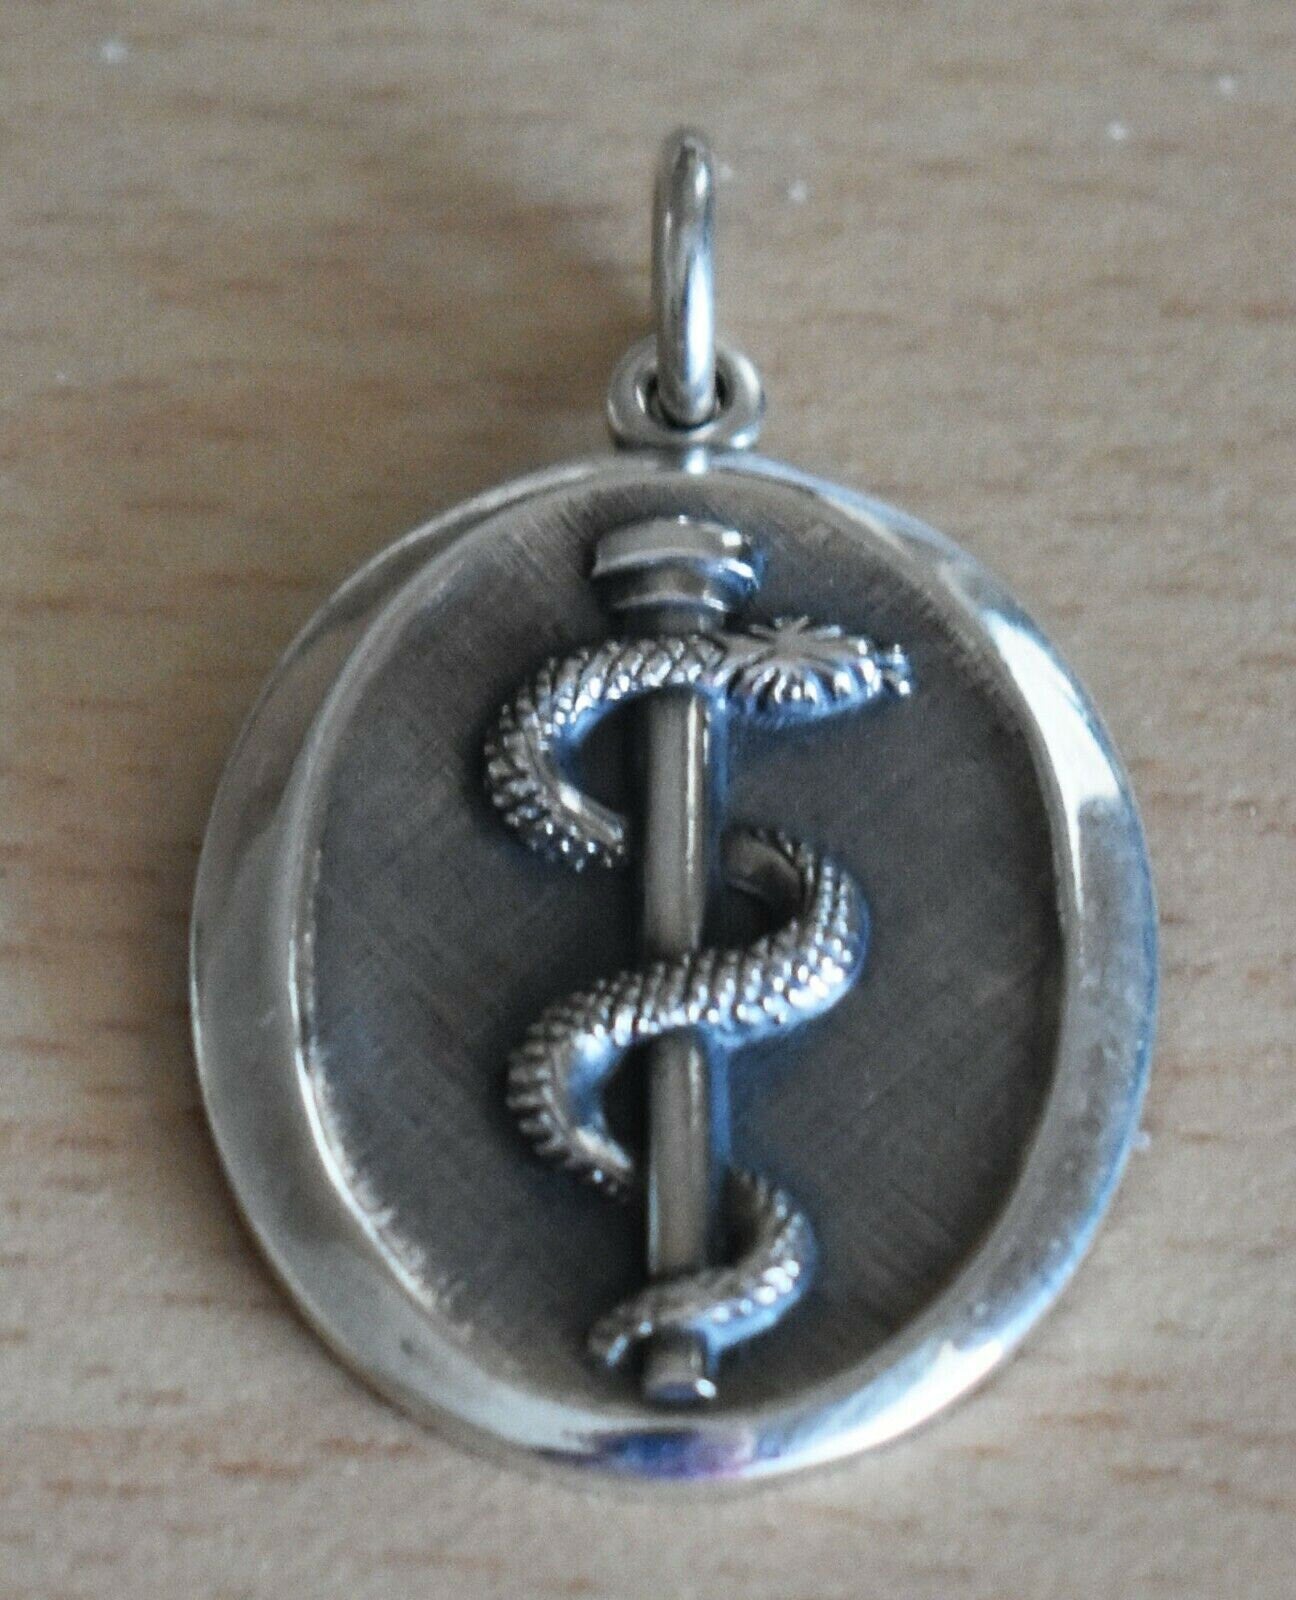 Rod - Sacred Symbol of Asclepius -  Ancient Greek God of Medicine and Healing - DNA Helix - Pendant - 925 Sterling Silver